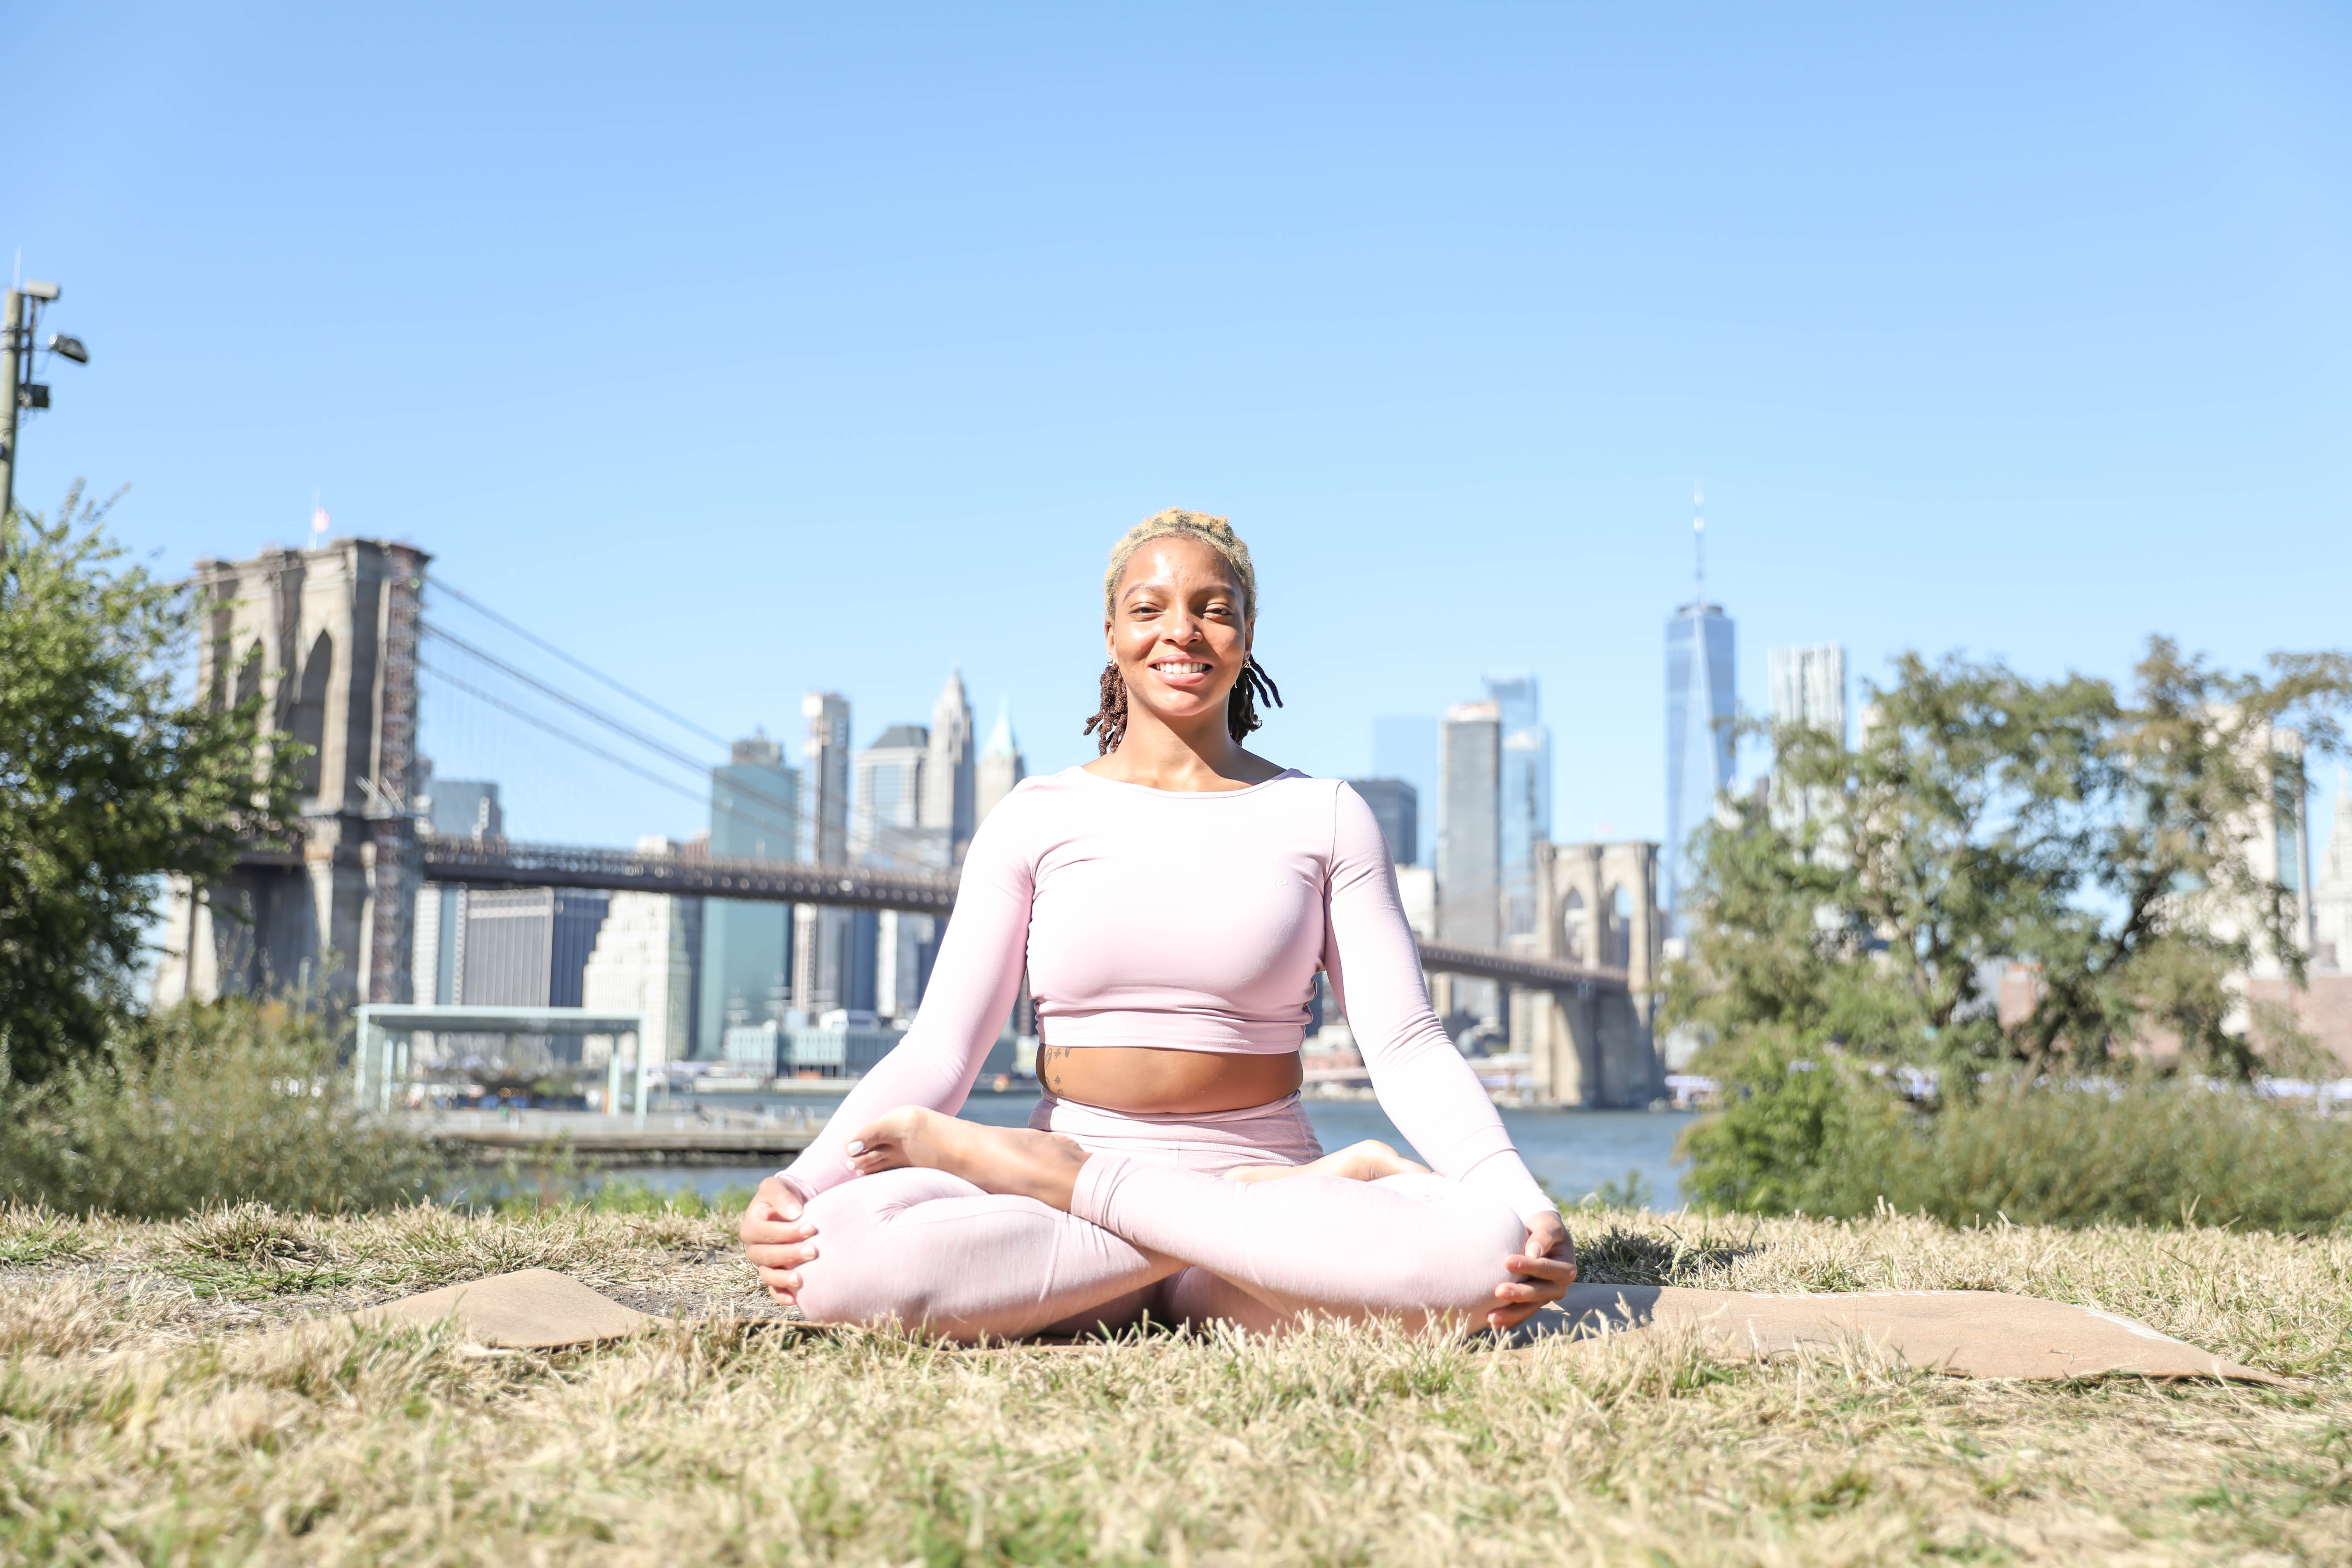 Watch: How These Yoga Instructors Keep Their Composure in New York City’s “New Normal”